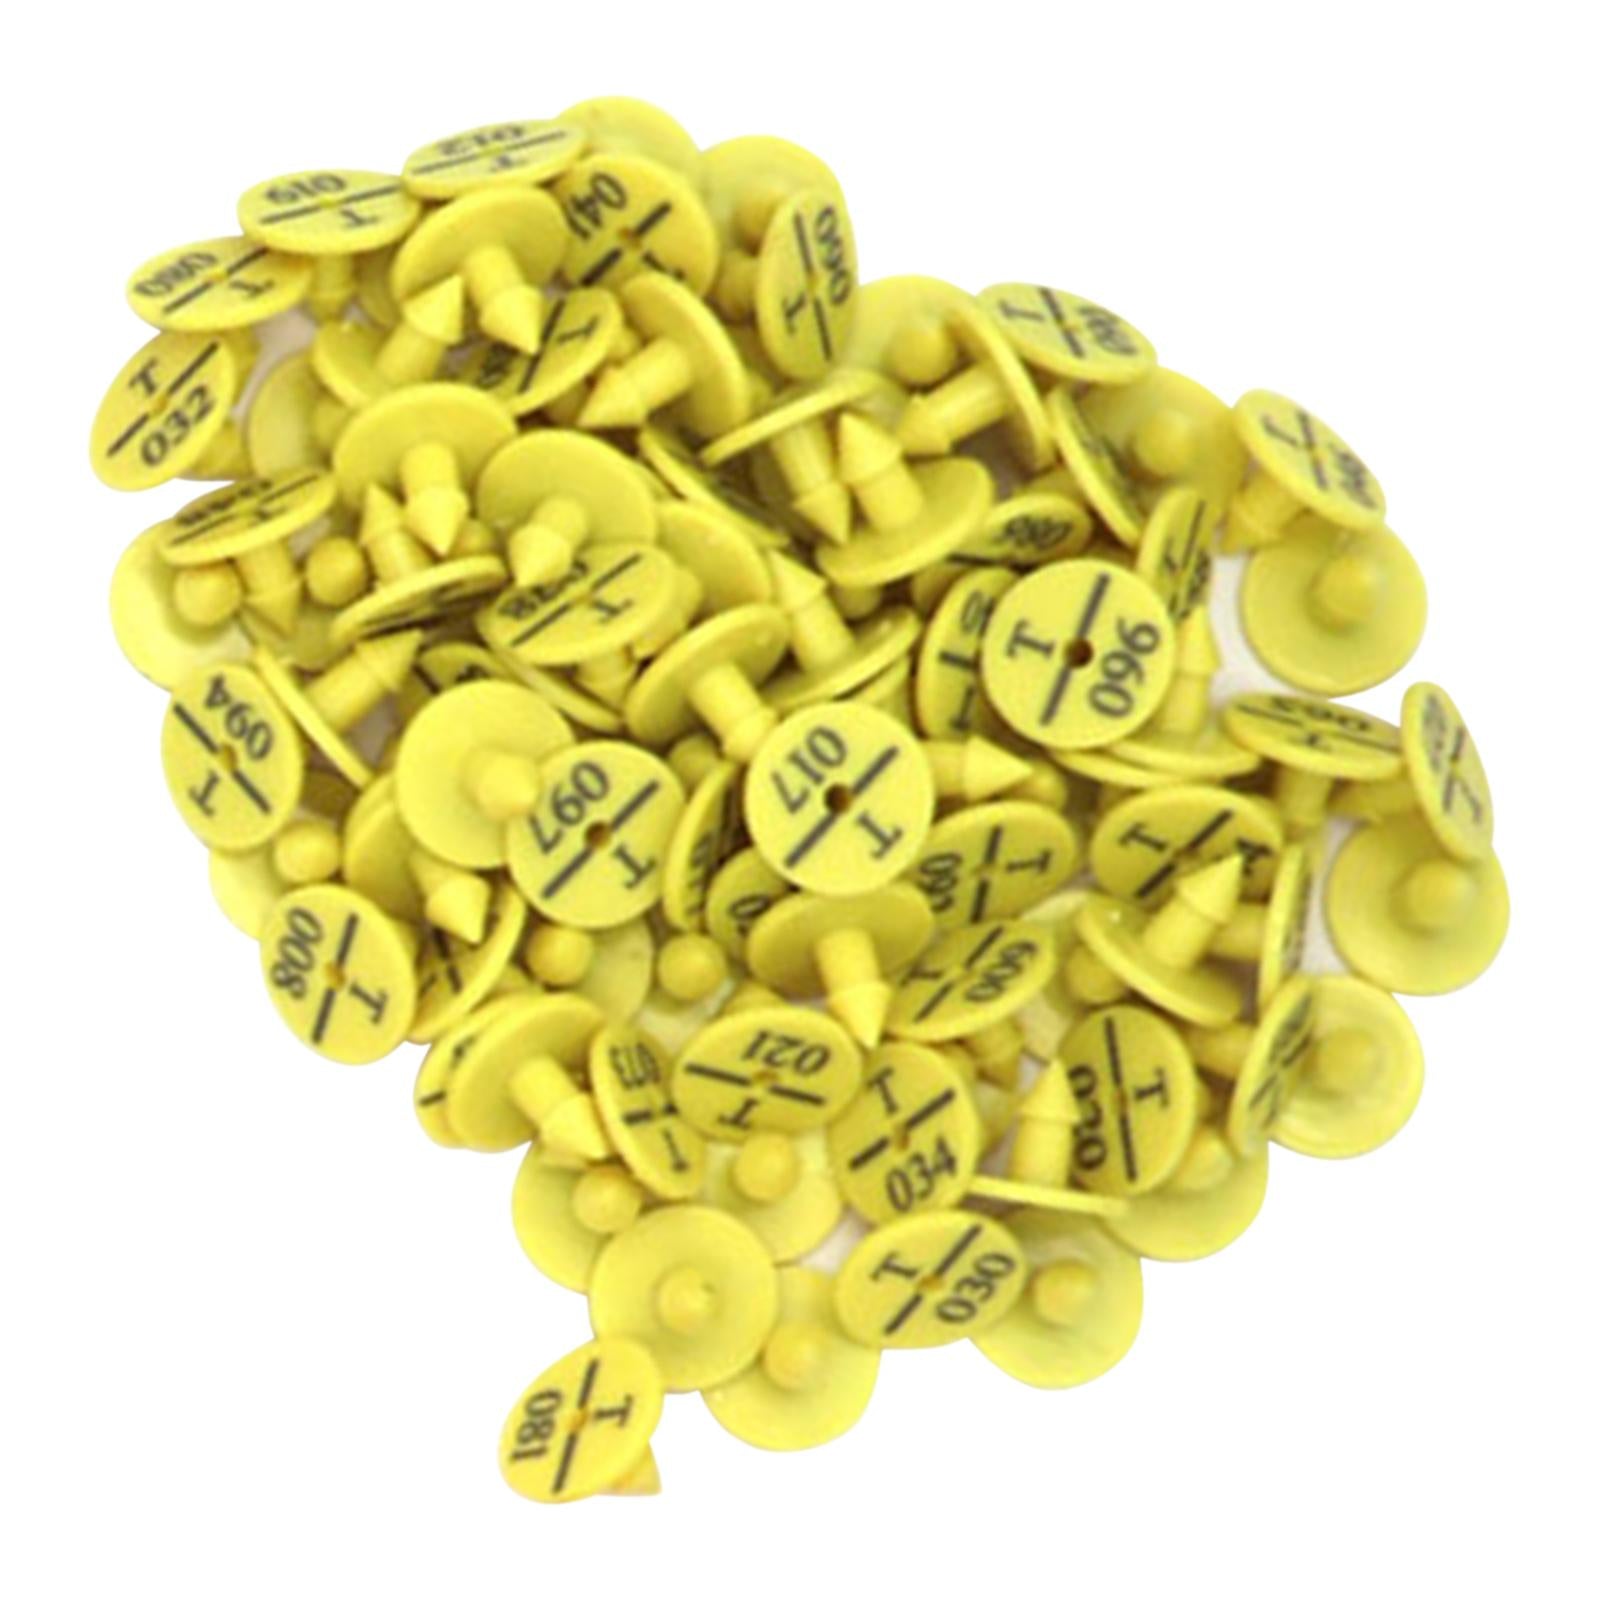 100Pcs Numbered Ear Tag Earrings for Rabbit Cow Cattle Pigs Calf Hogs Sheep Yellow